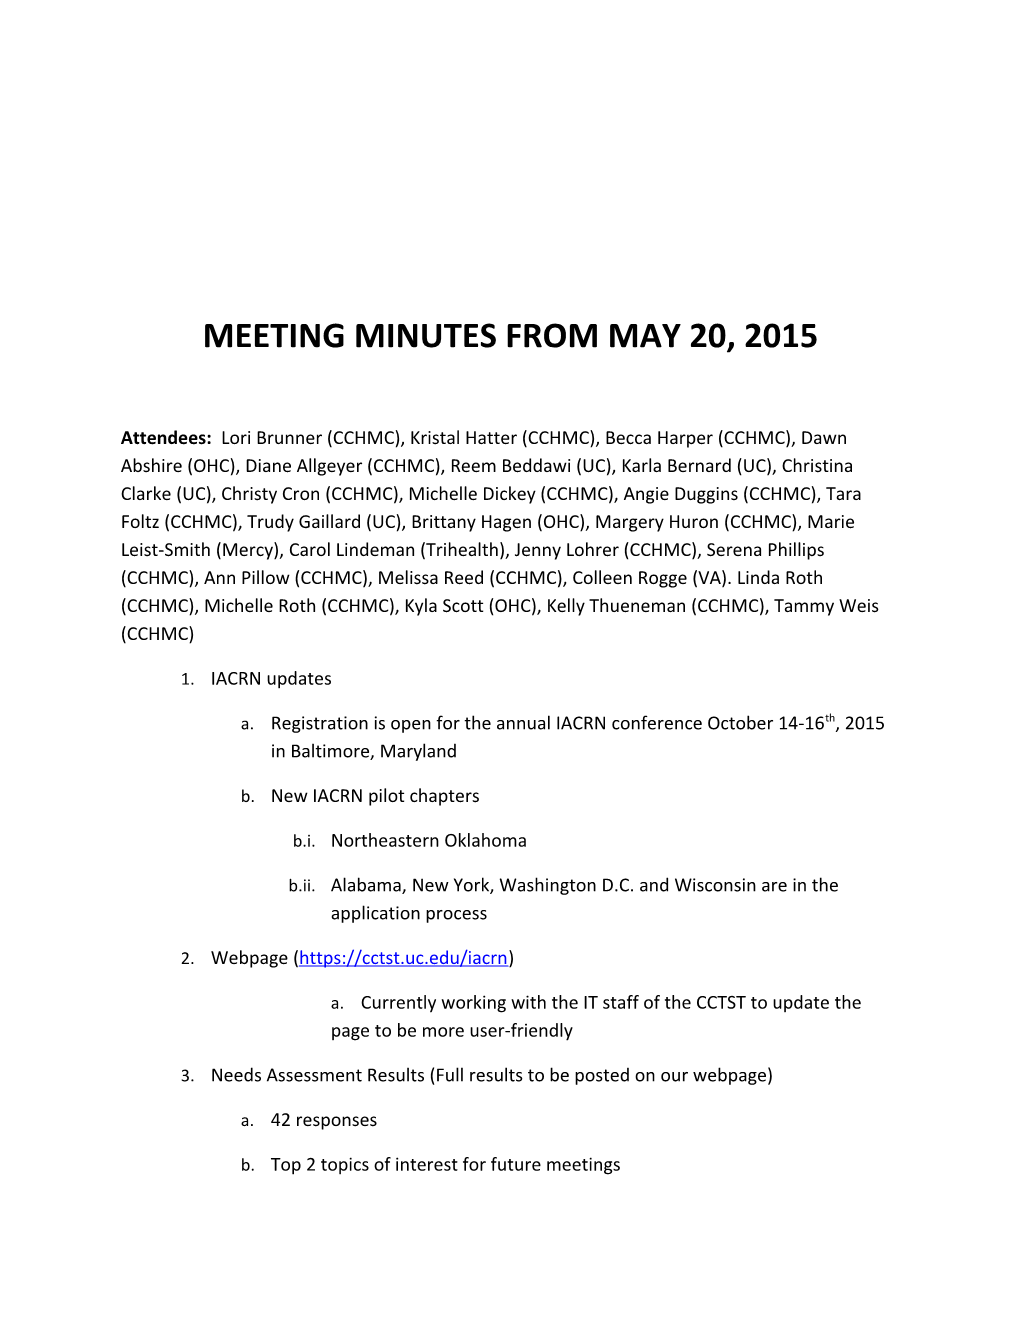 Meeting Minutes from May 20, 2015